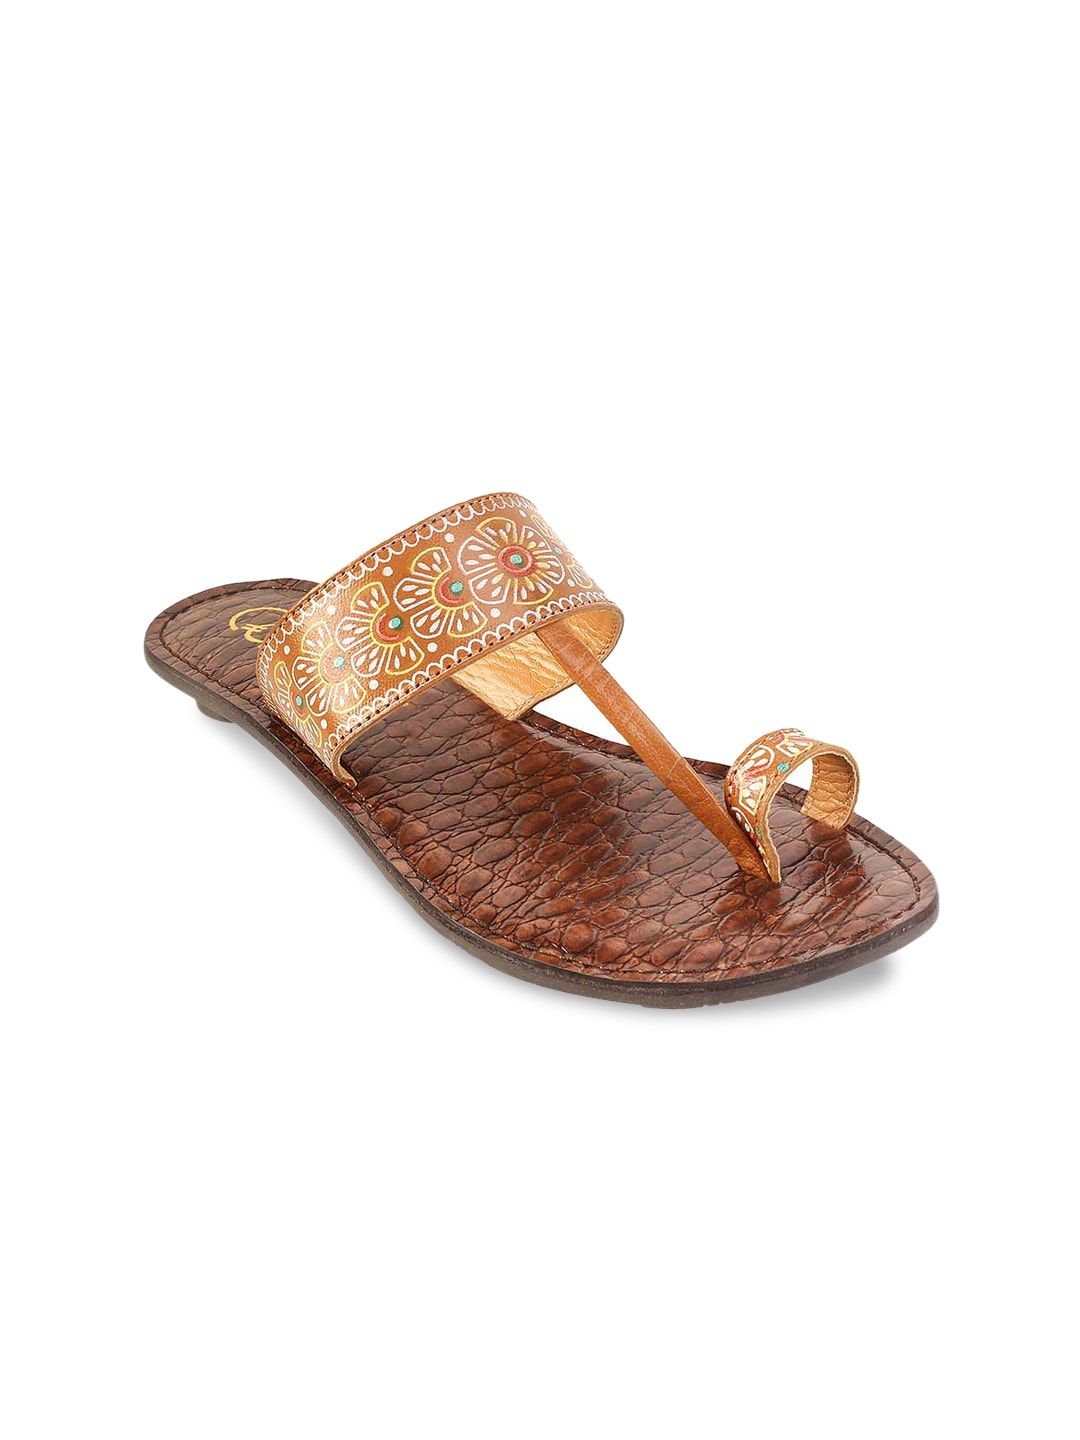 Catwalk Women Brown Printed Leather Kholapuris One Toe Flats Price in India